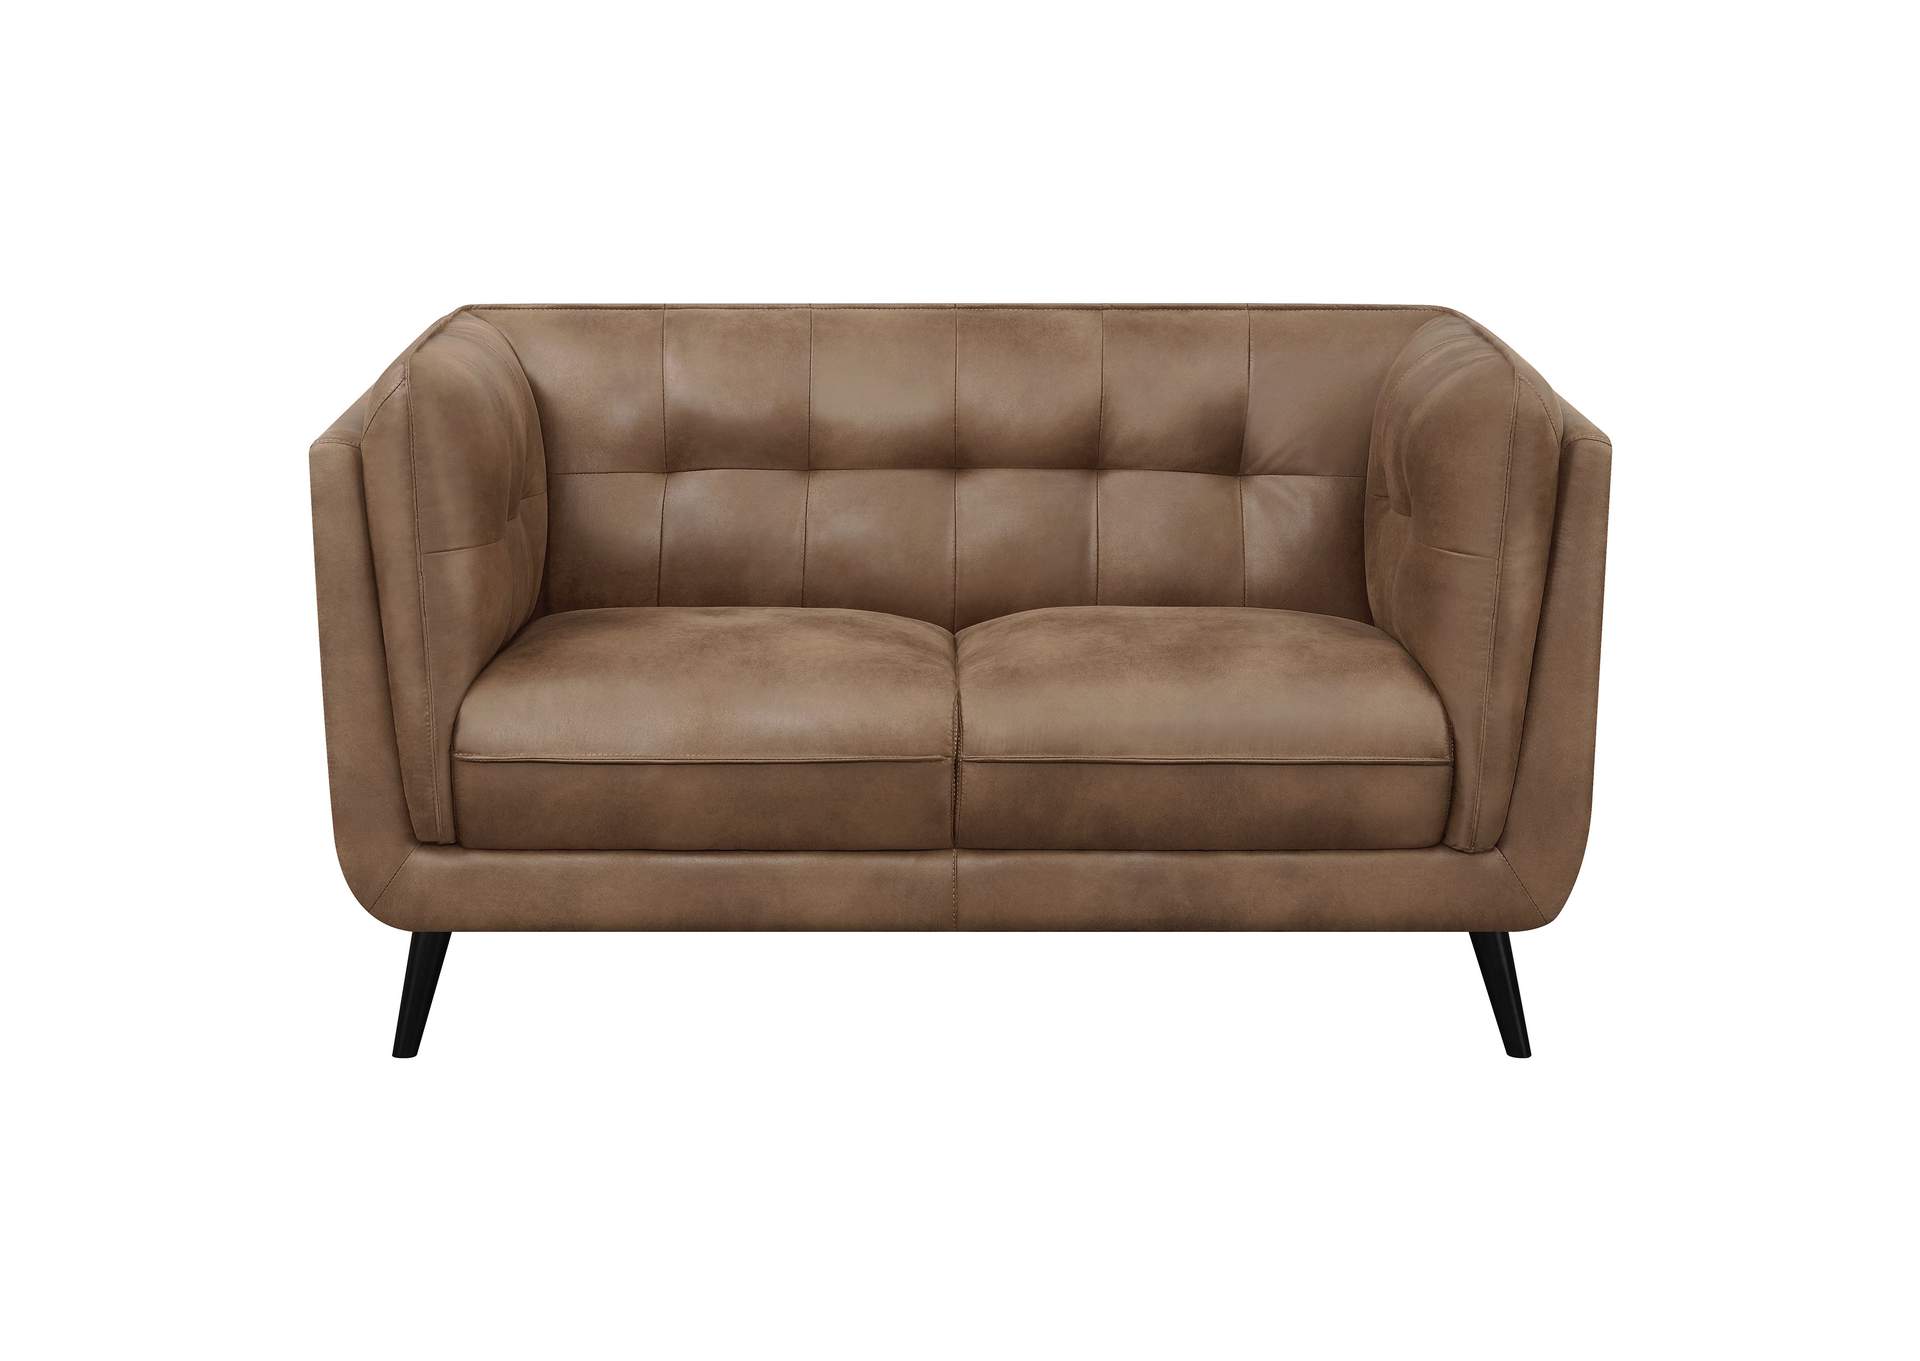 Thatcher Upholstered Button Tufted Loveseat Brown,Coaster Furniture